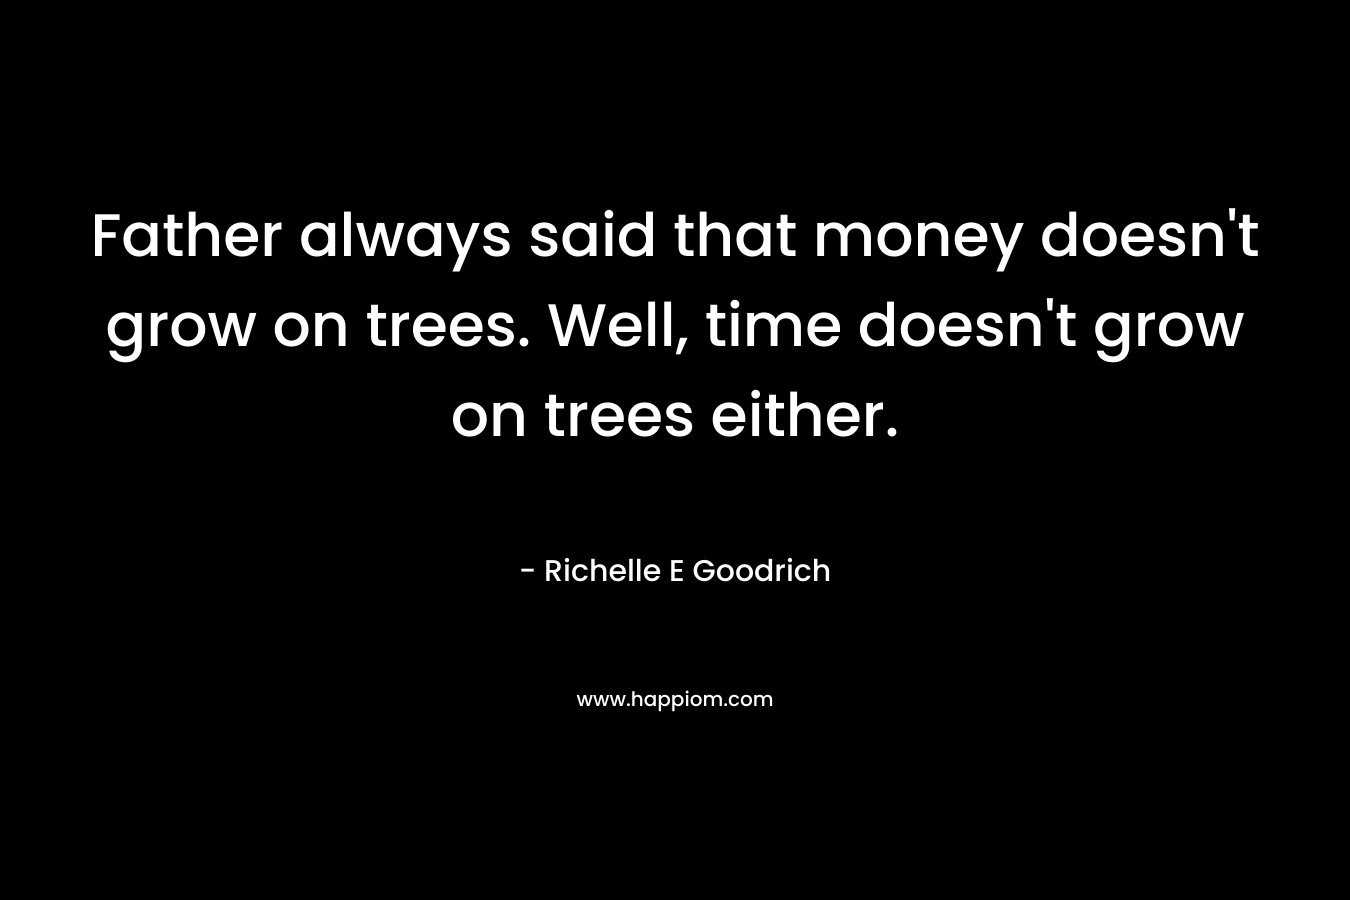 Father always said that money doesn't grow on trees. Well, time doesn't grow on trees either.